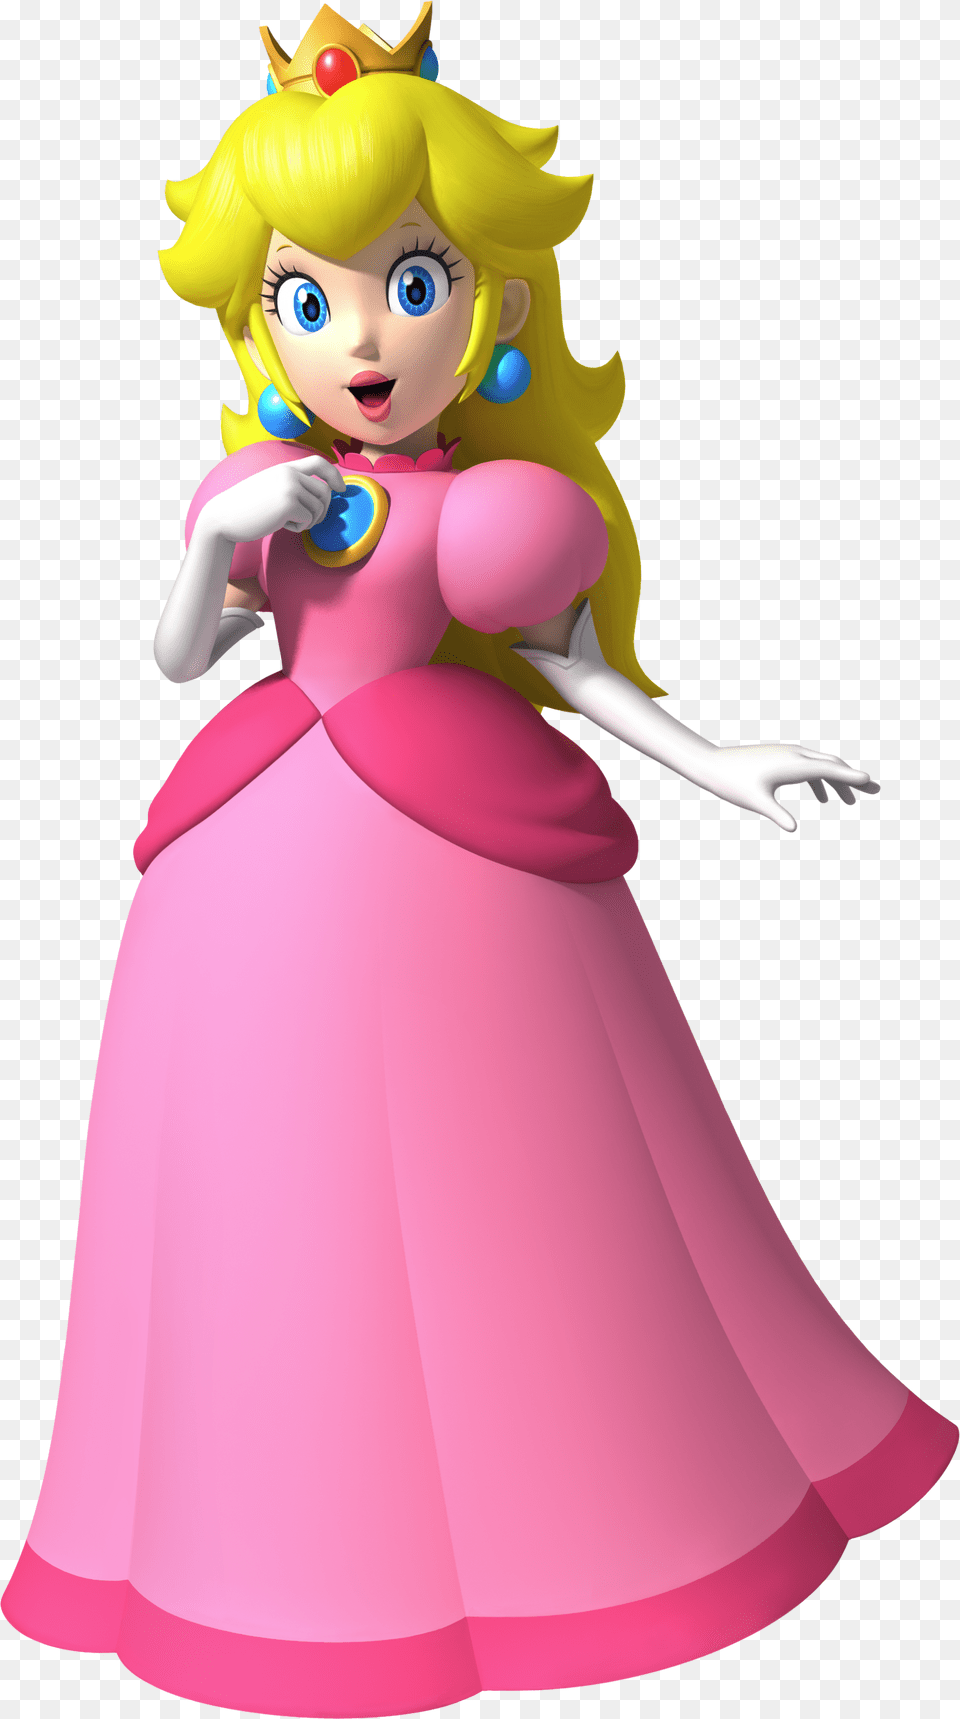 Princess Peach Toadstool Princess Peach New Super Mario Bros Wii, Clothing, Dress, Baby, Person Png Image